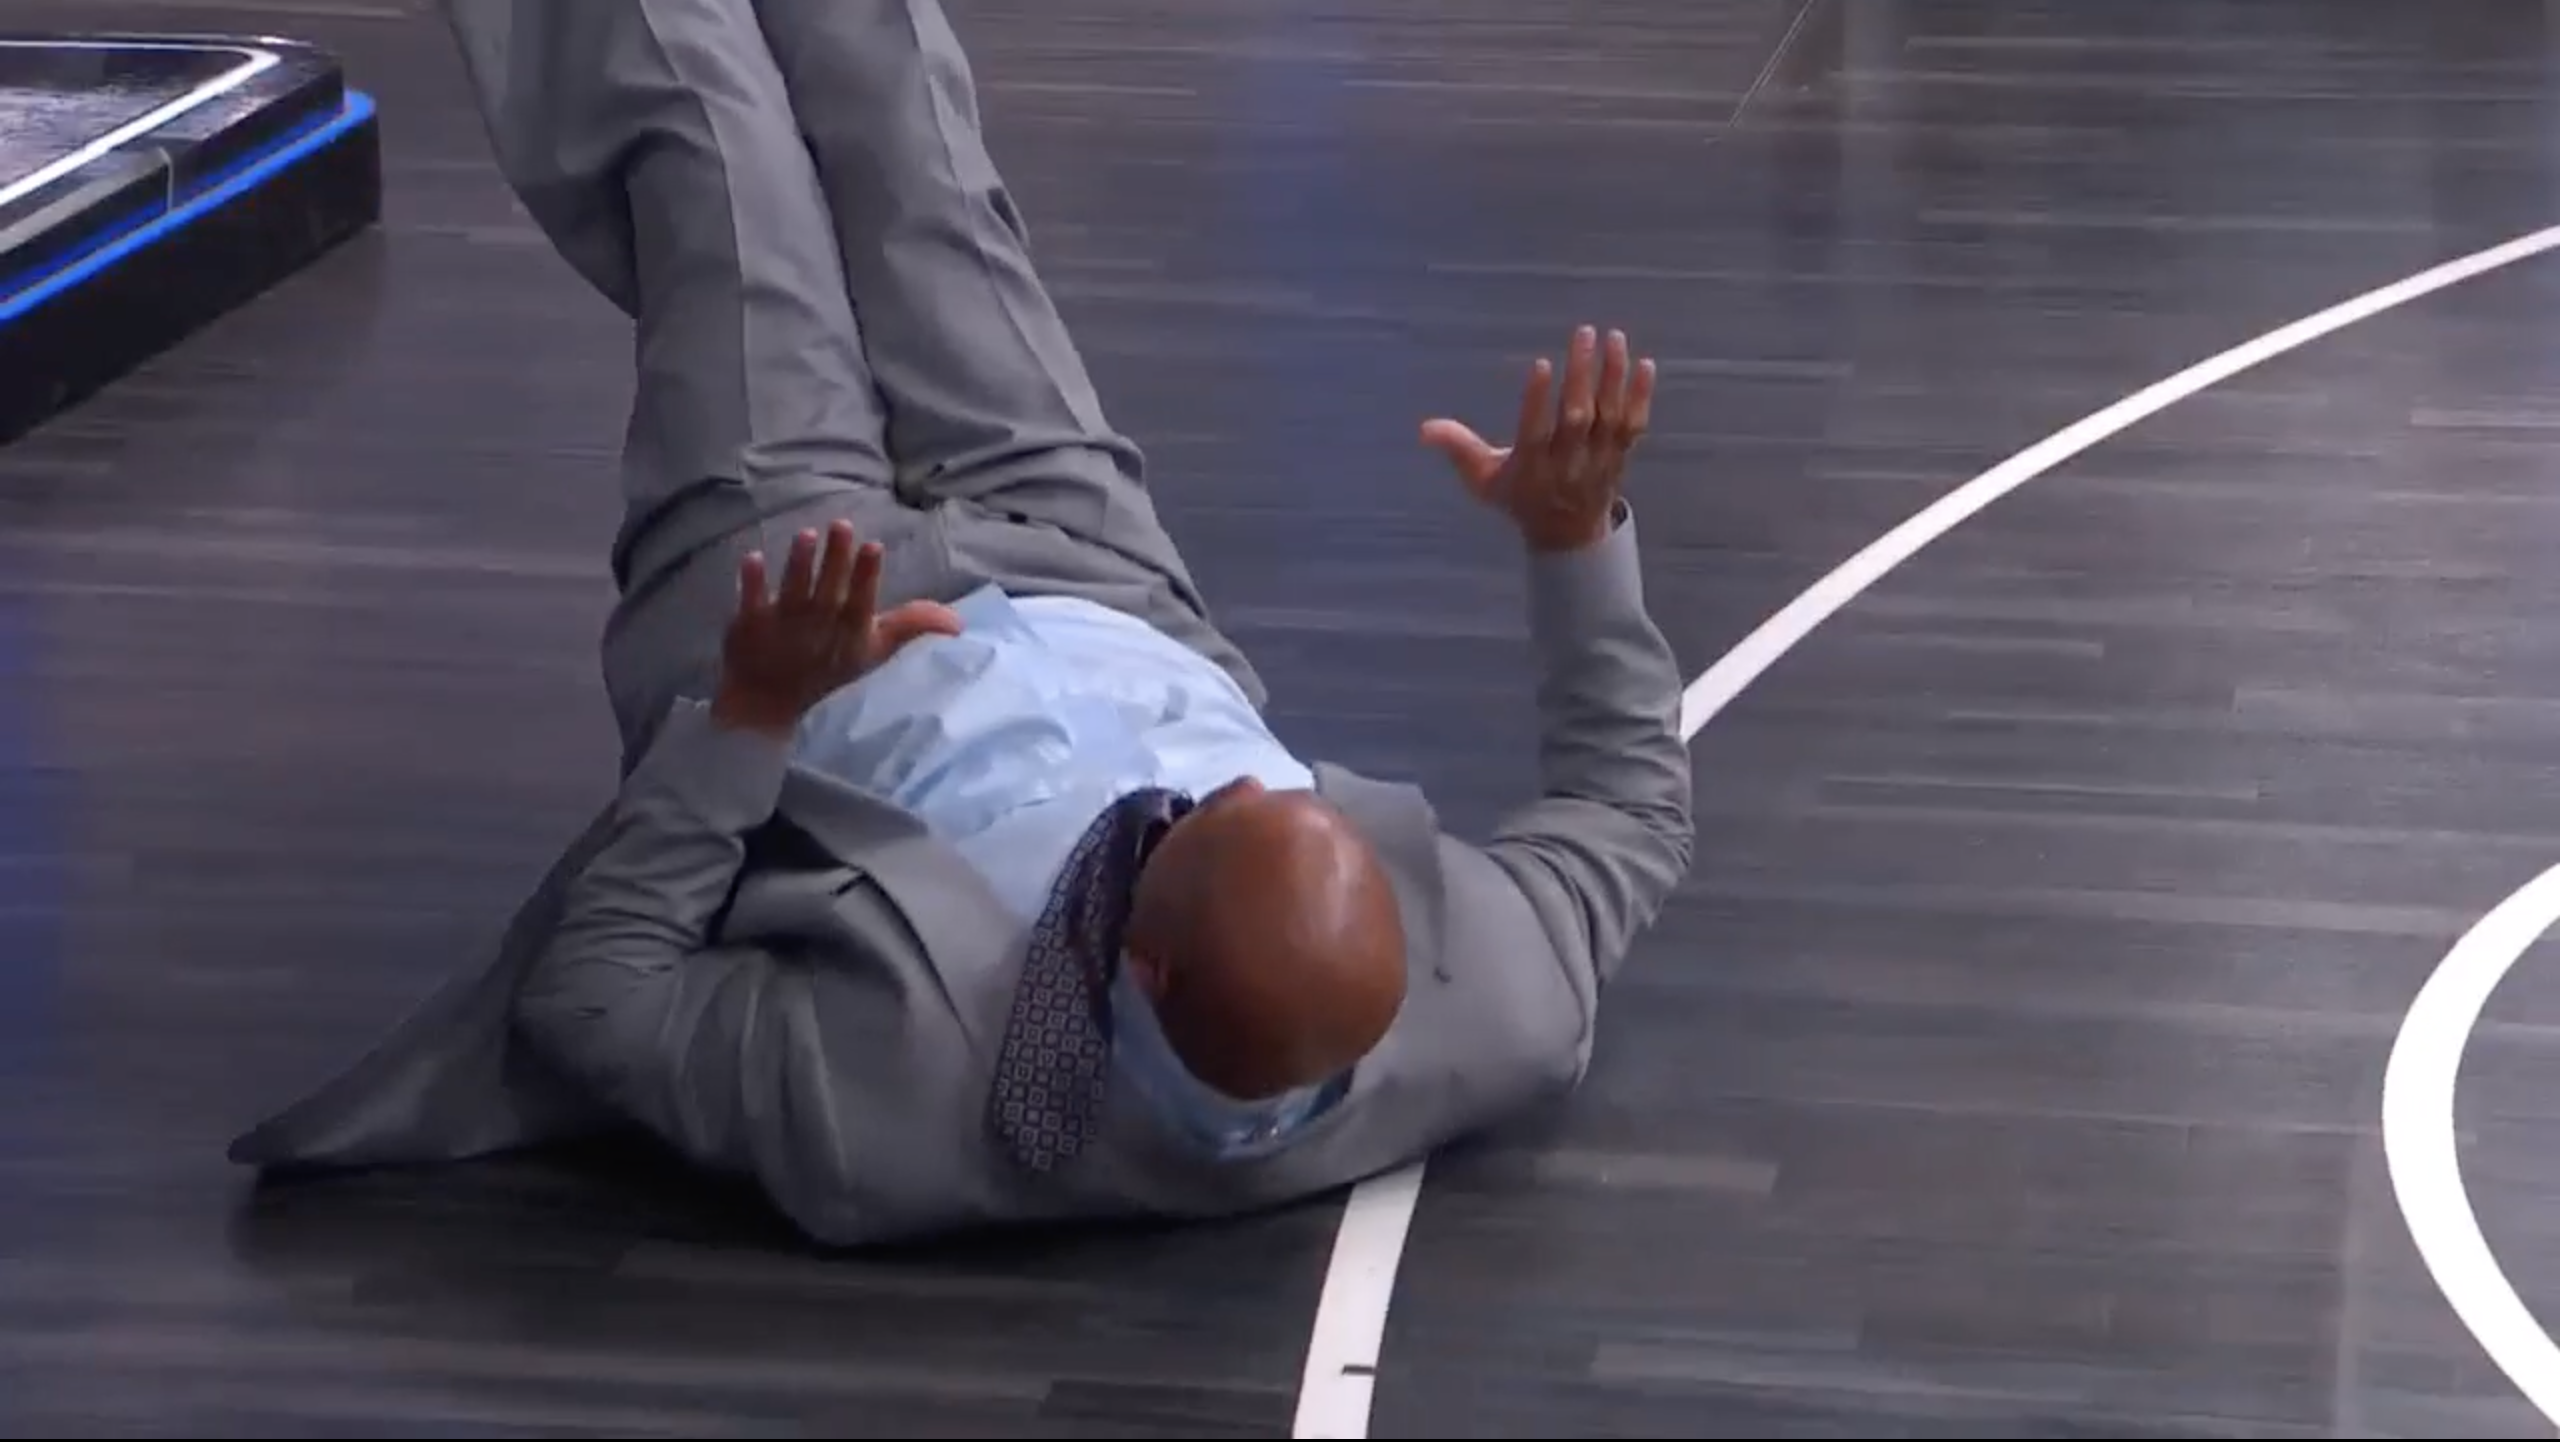 Charles Barkley Demonstrates How to Fall Safely [Video]